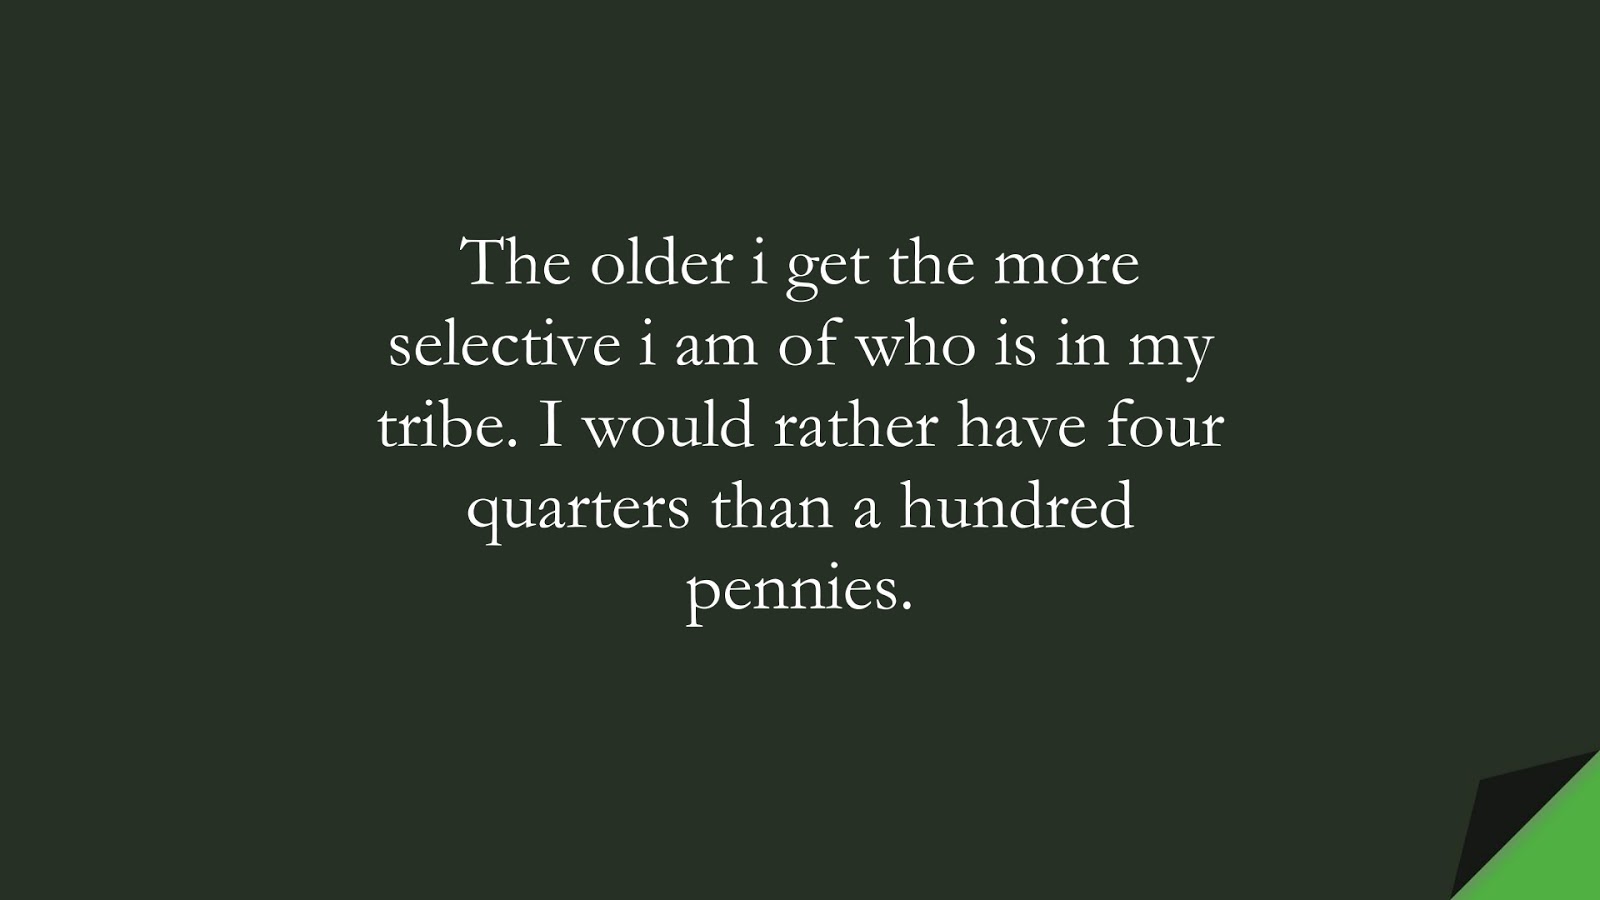 The older i get the more selective i am of who is in my tribe. I would rather have four quarters than a hundred pennies.FALSE